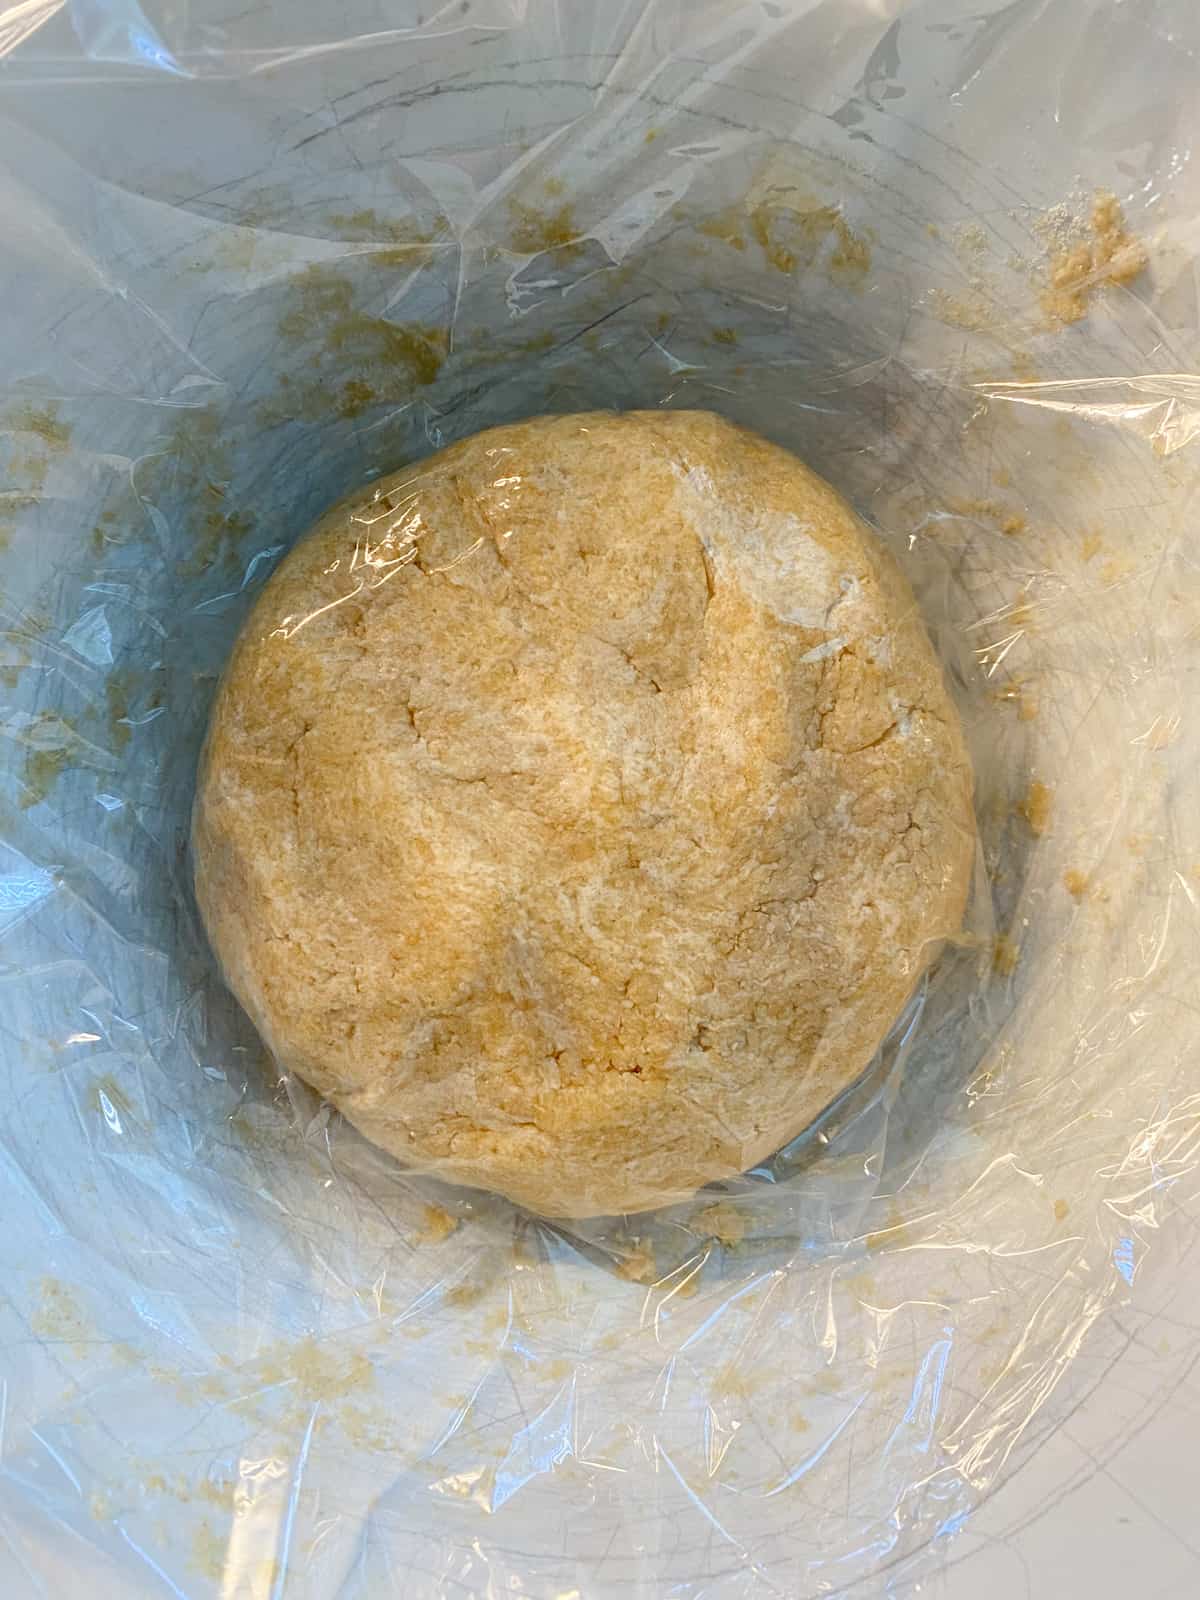 Mixed dough, formed into a disk, covered with plastic wrap.